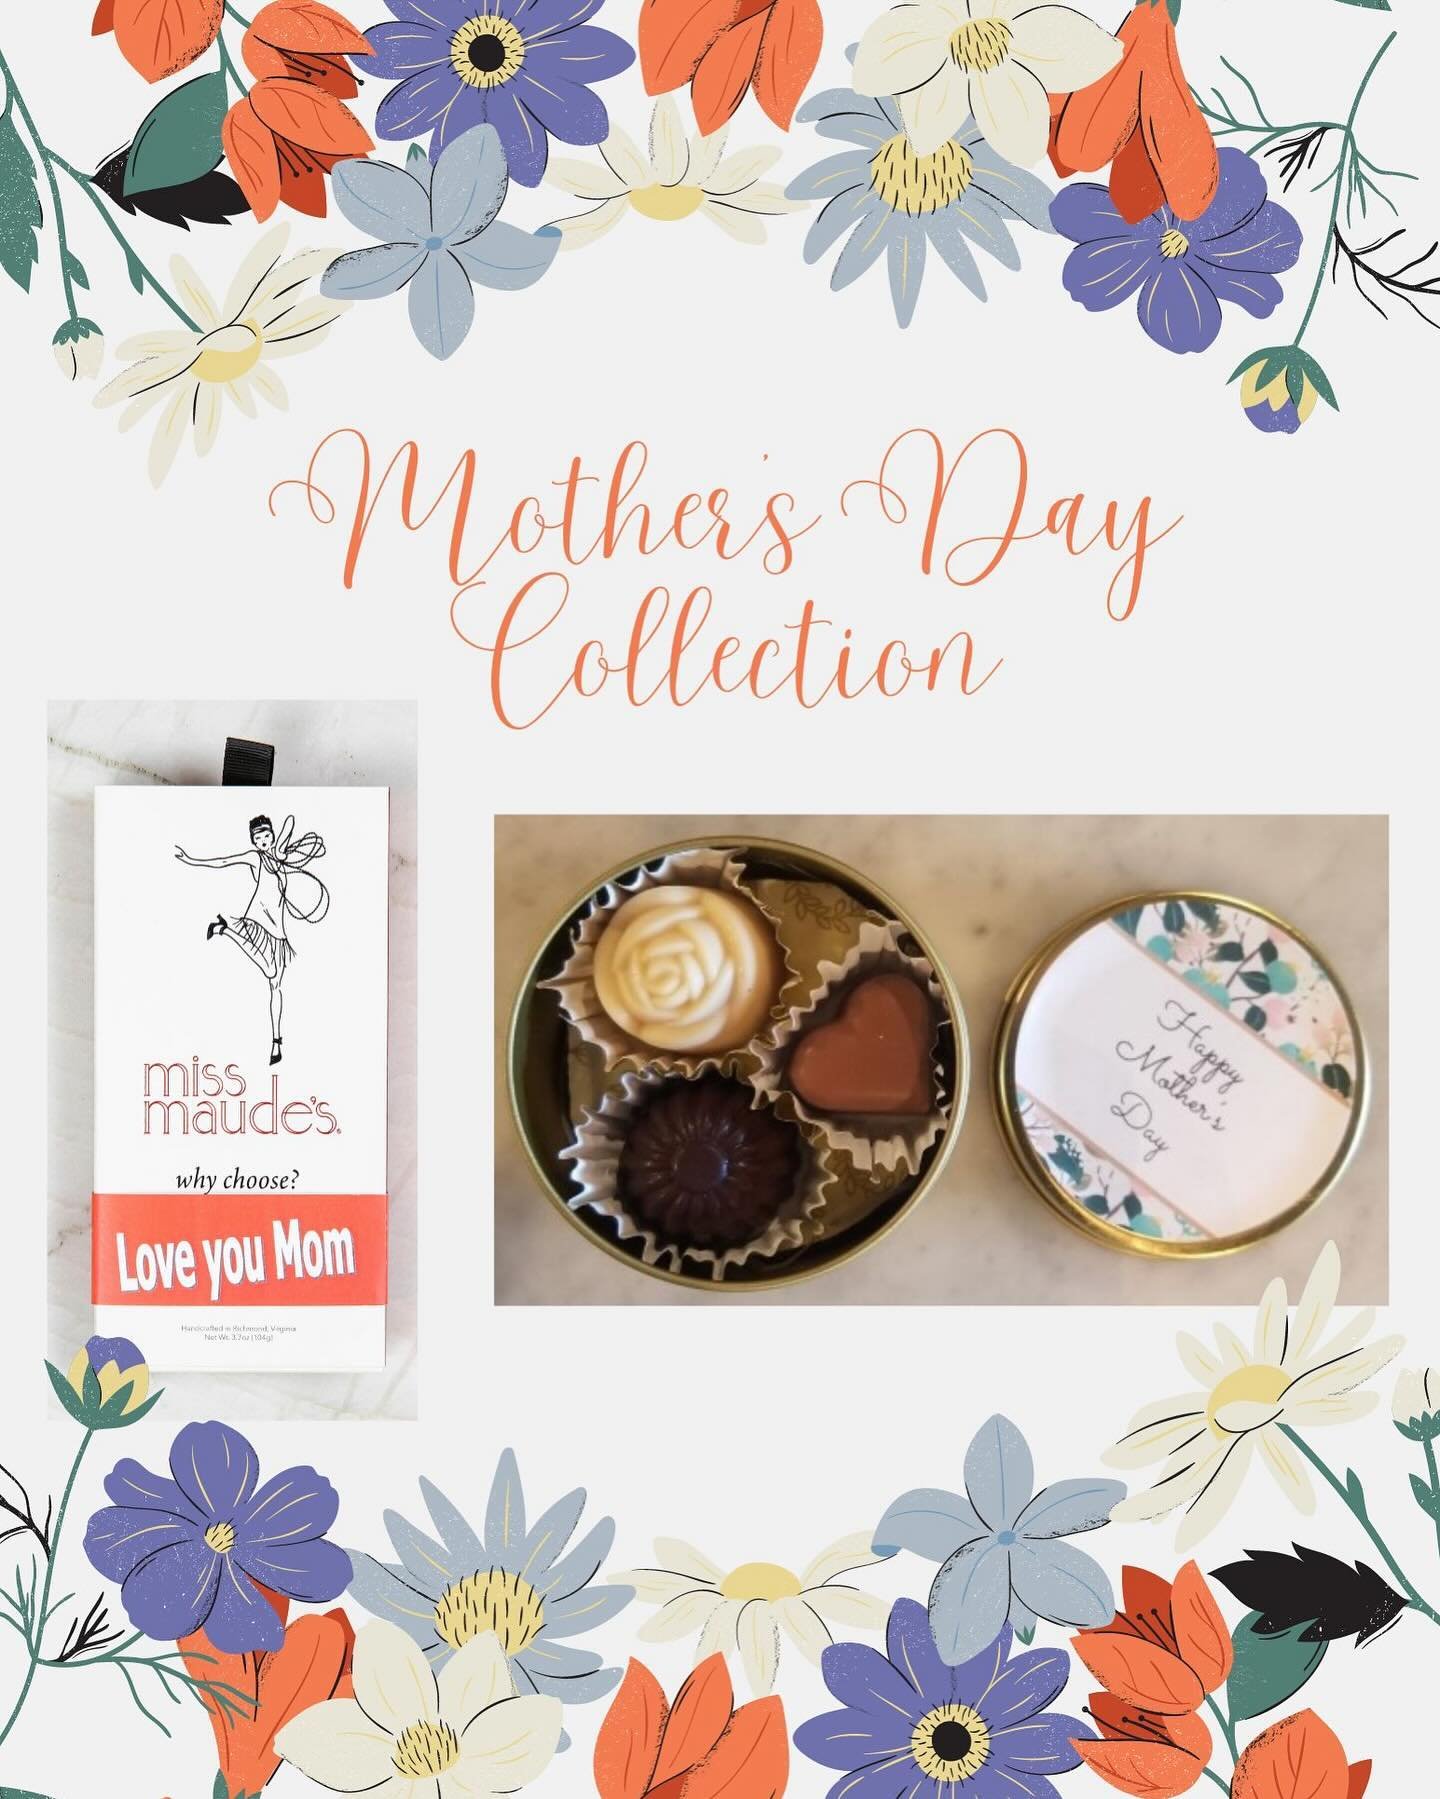 Celebrate the incredible mums in your life with well deserved treats from yours truly. 

This year, surprise your favorite mother figures with exquisite handmade truffle tins and a special Bar of Chocolates with a &lsquo;Love you Mom&rsquo; wrap.

XX